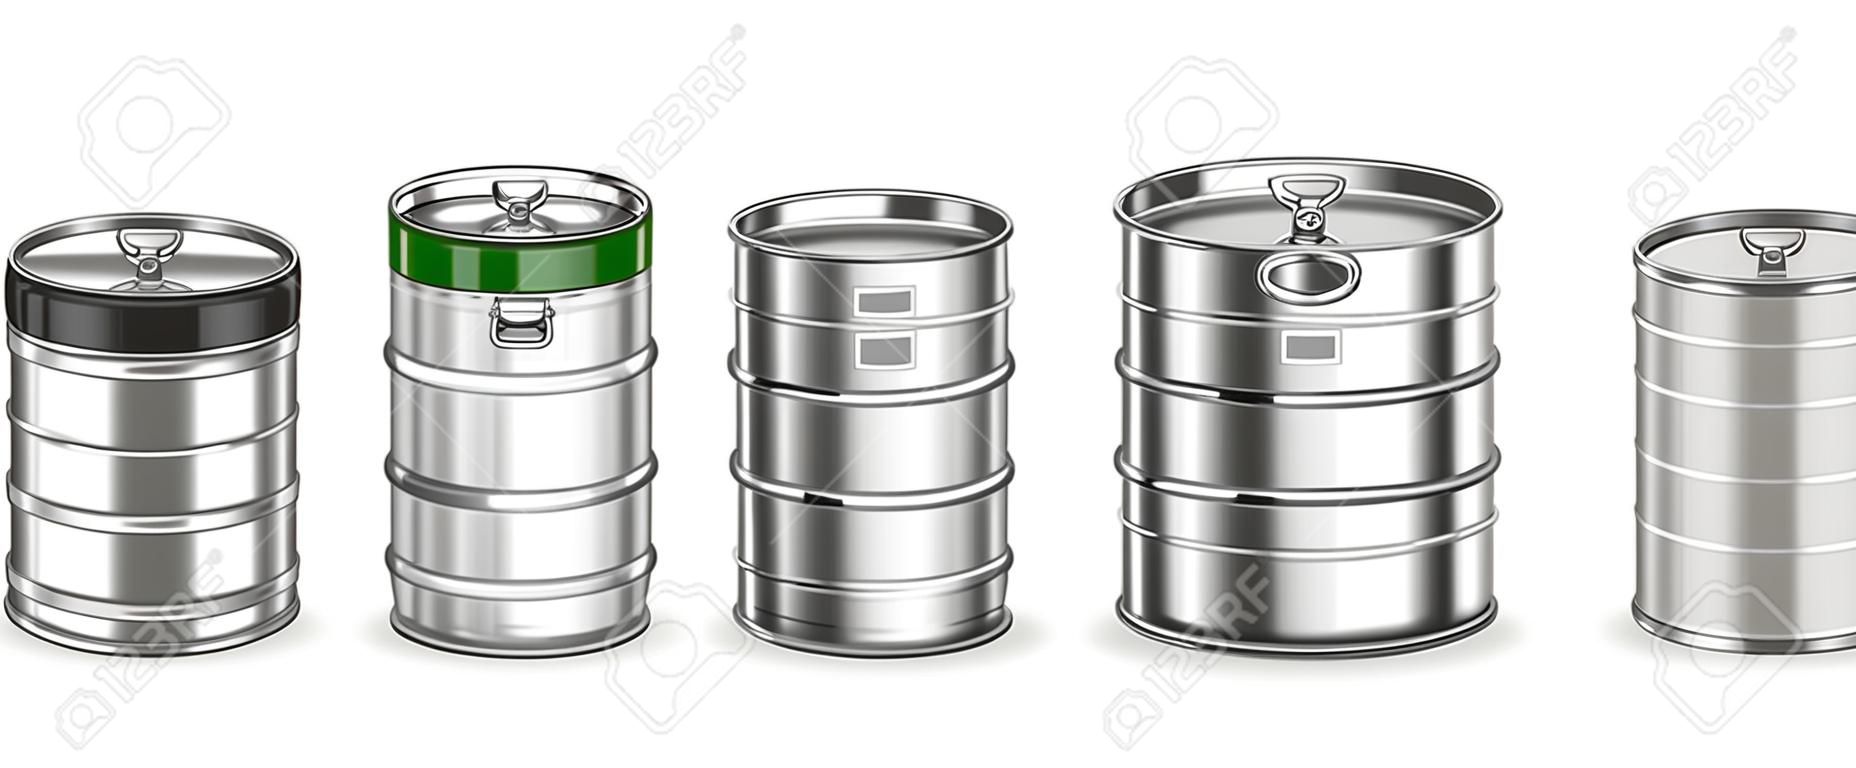 Collection Of Beverage Keg Barrel Cask Set Vector. Different Material And Size. Stainless Steel, Glass And Plastic Container For Storage And Botteling Alcoholic Drink. Realistic 3d Illustration